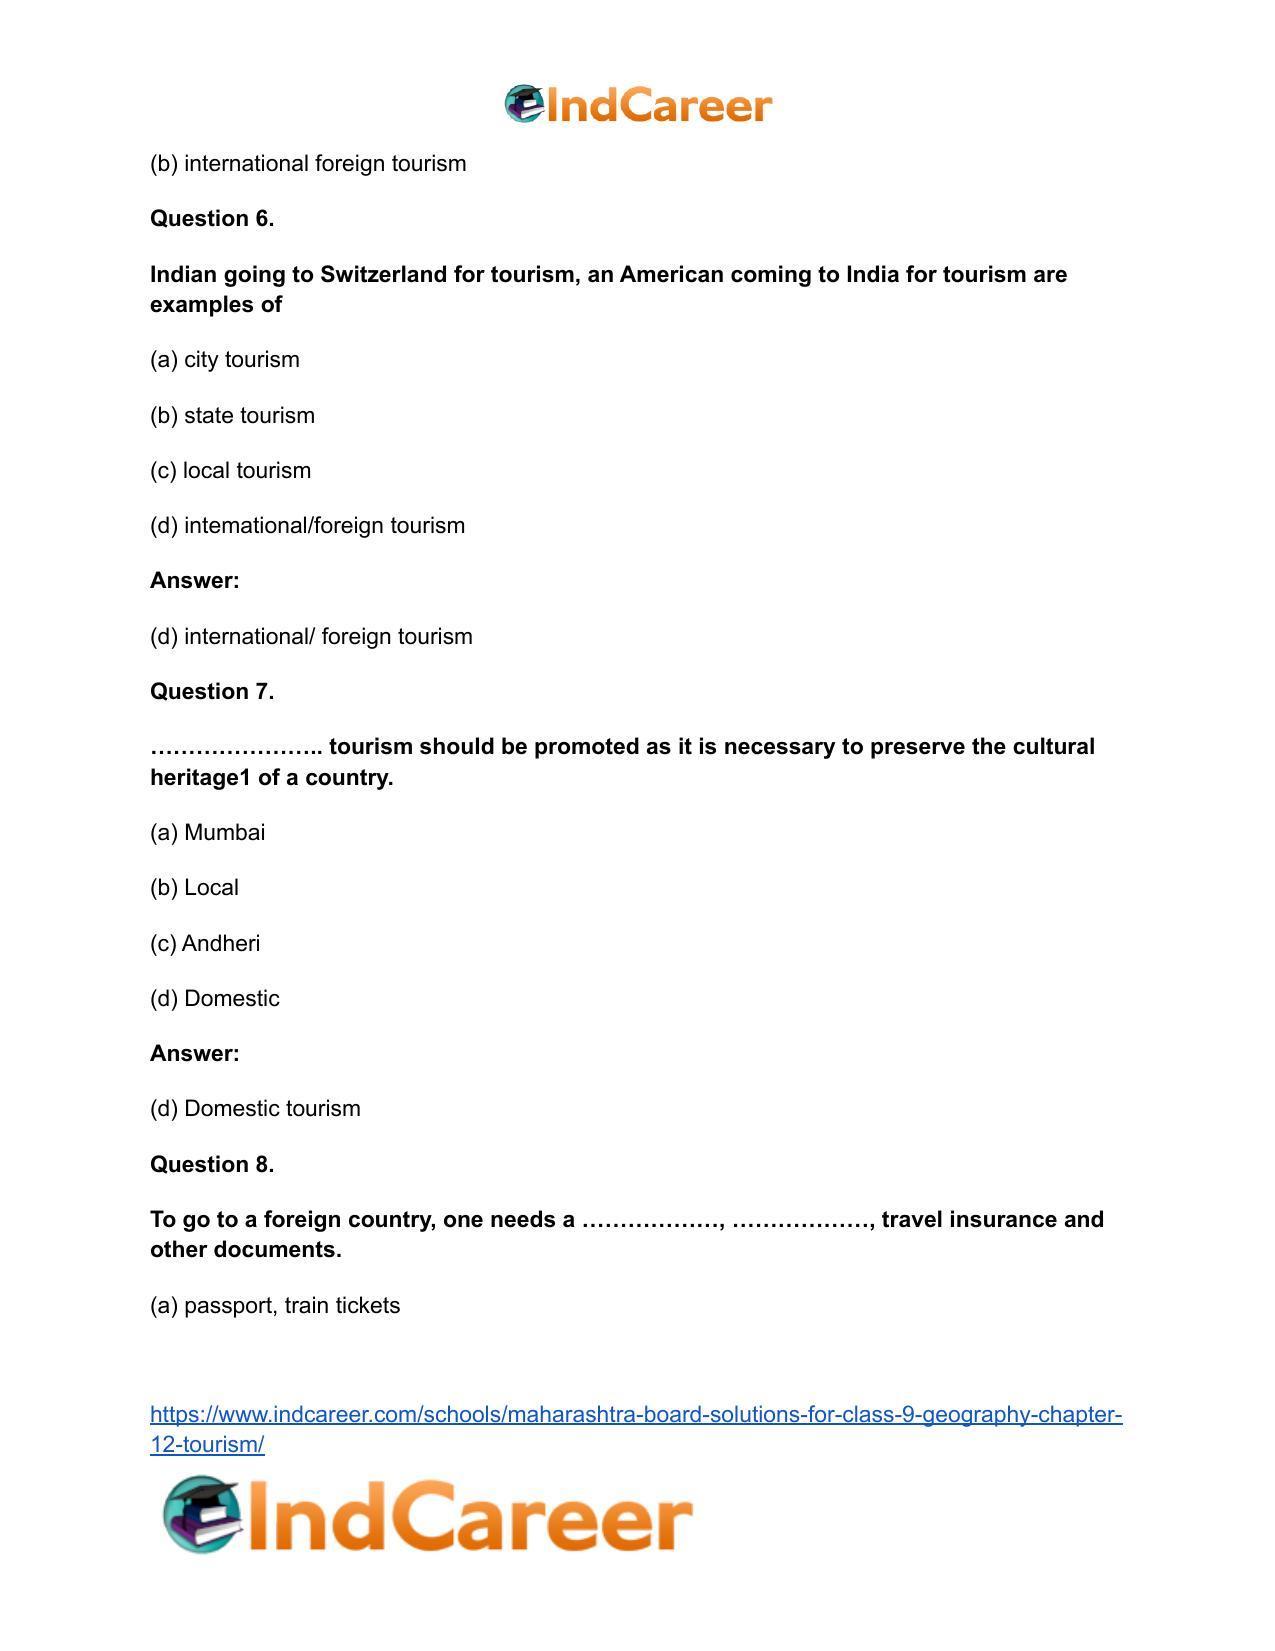 Maharashtra Board Solutions for Class 9- Geography: Chapter 12- Tourism - Page 16